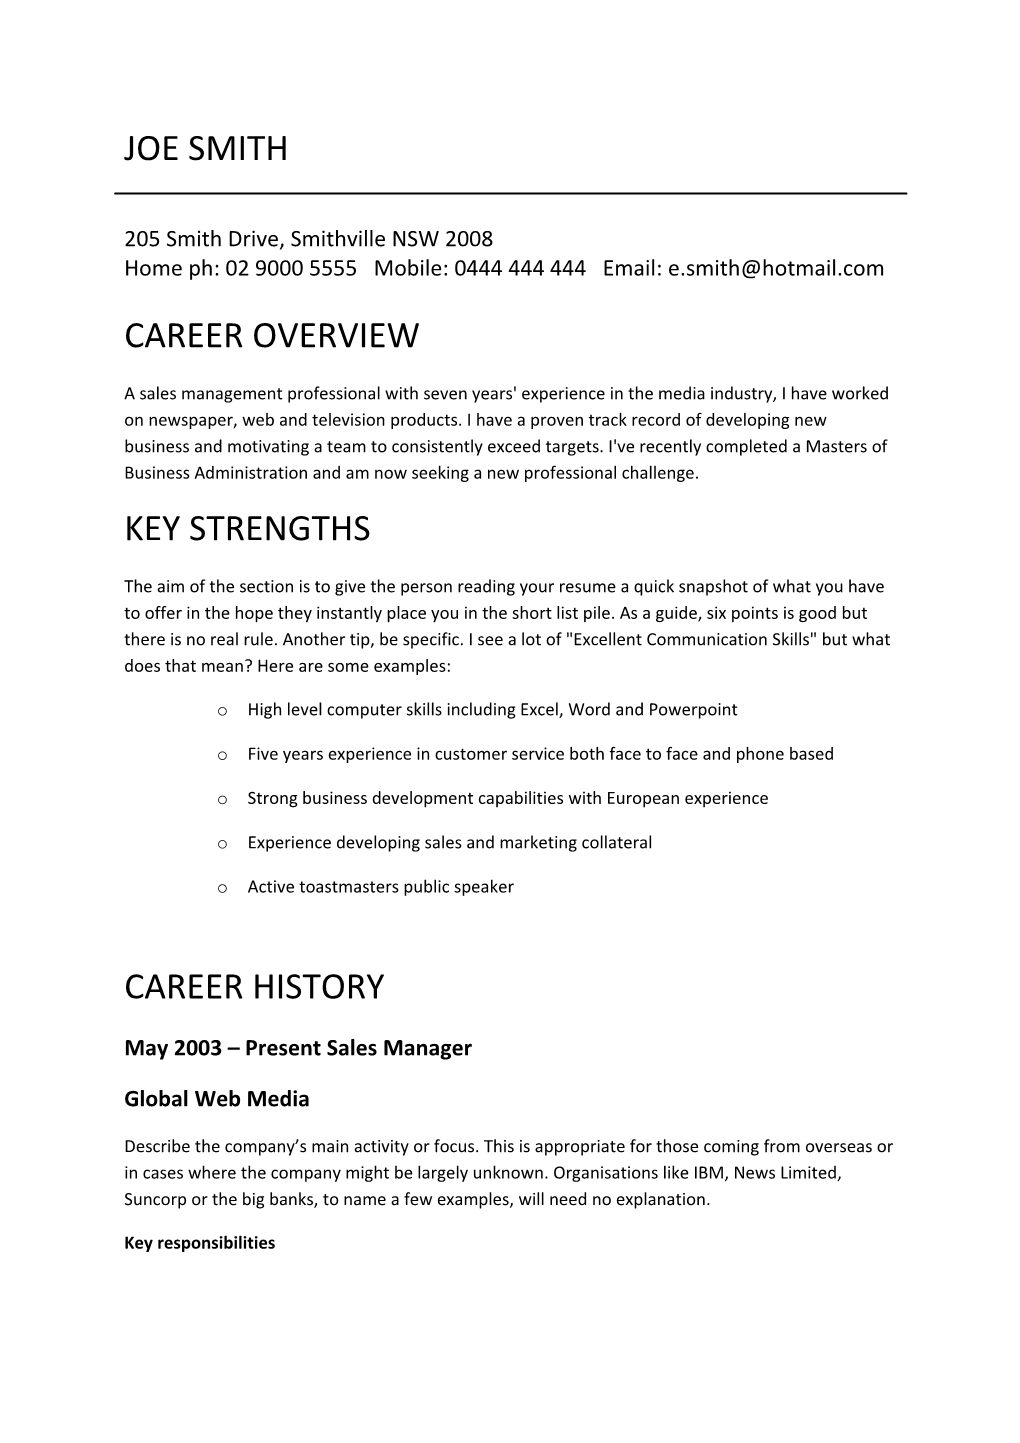 Career Overview